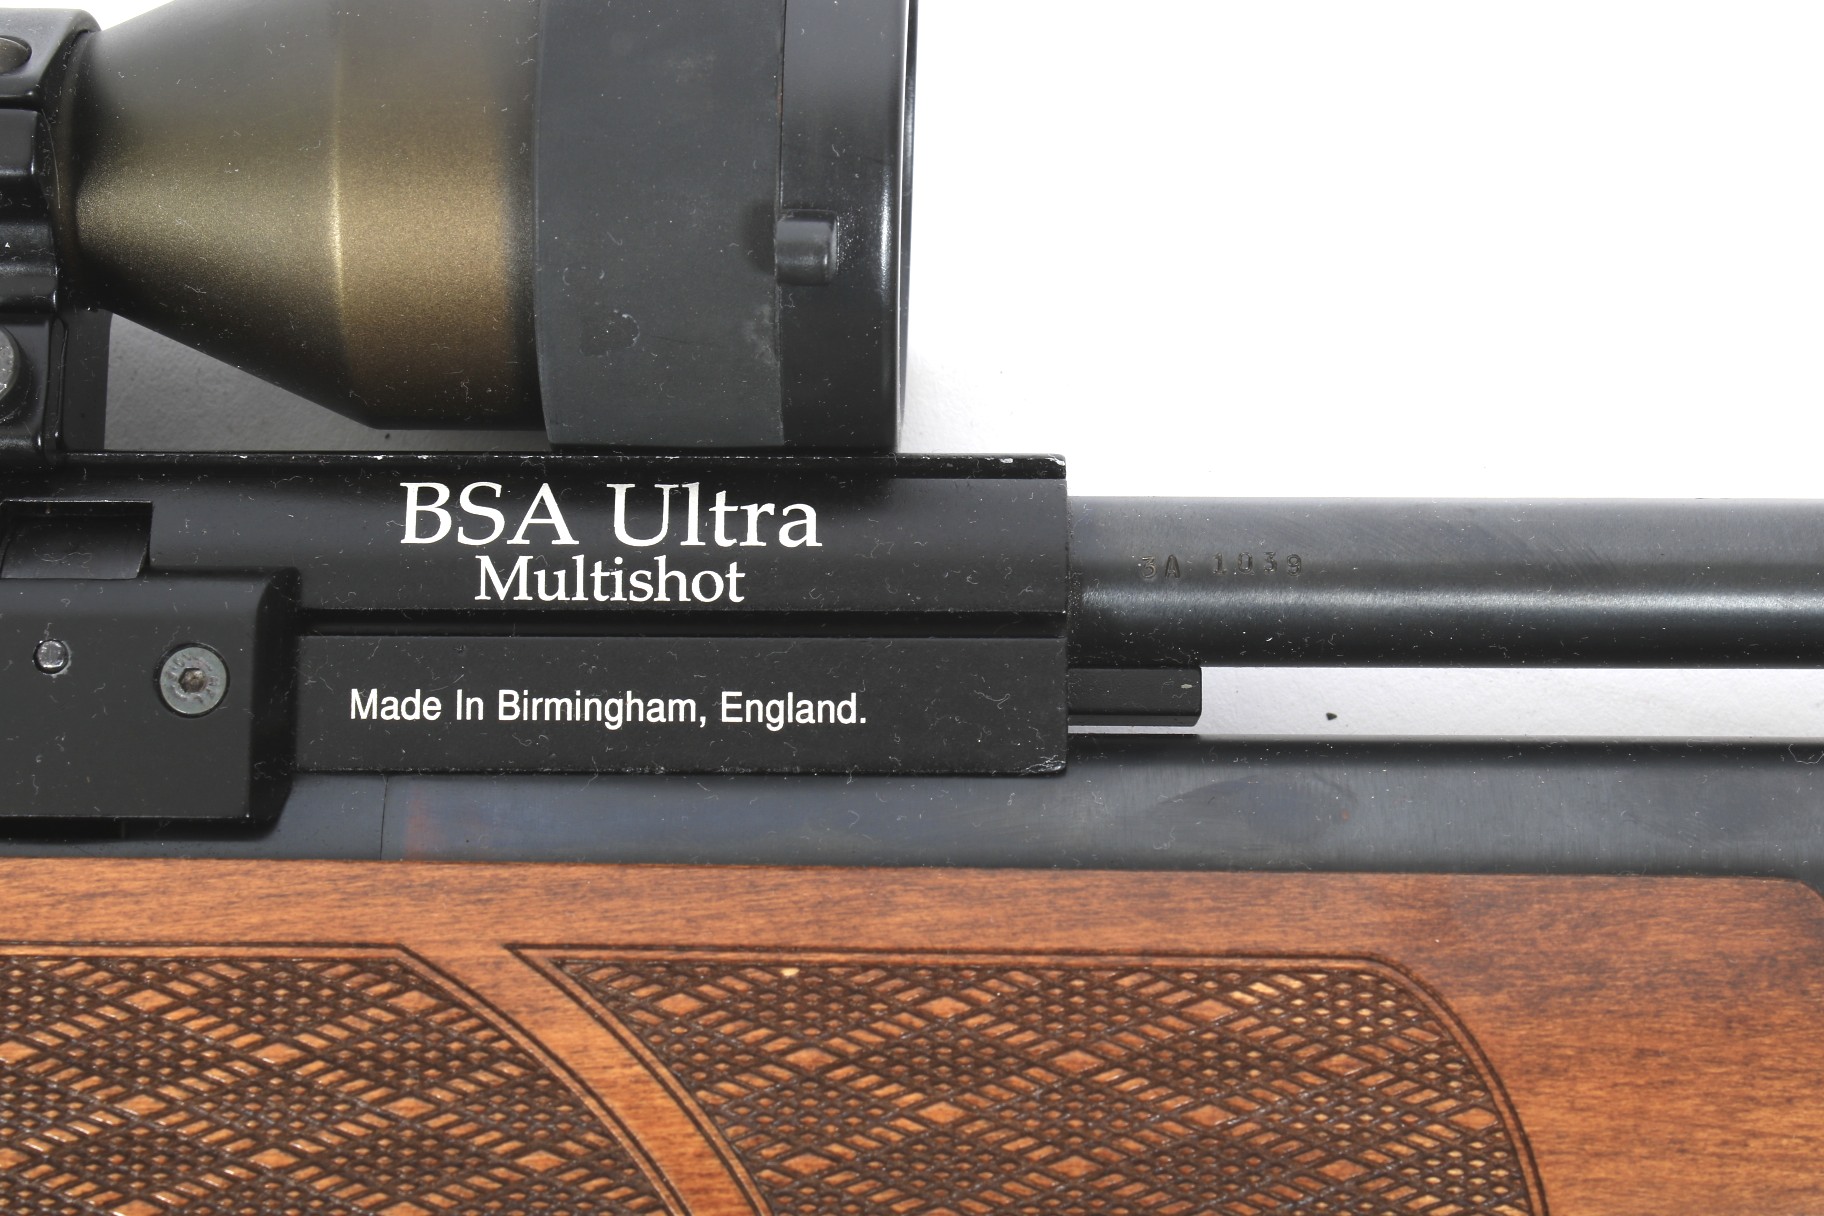 A BSA ultra multishot 177 air rifle with AGS scope. - Image 2 of 3